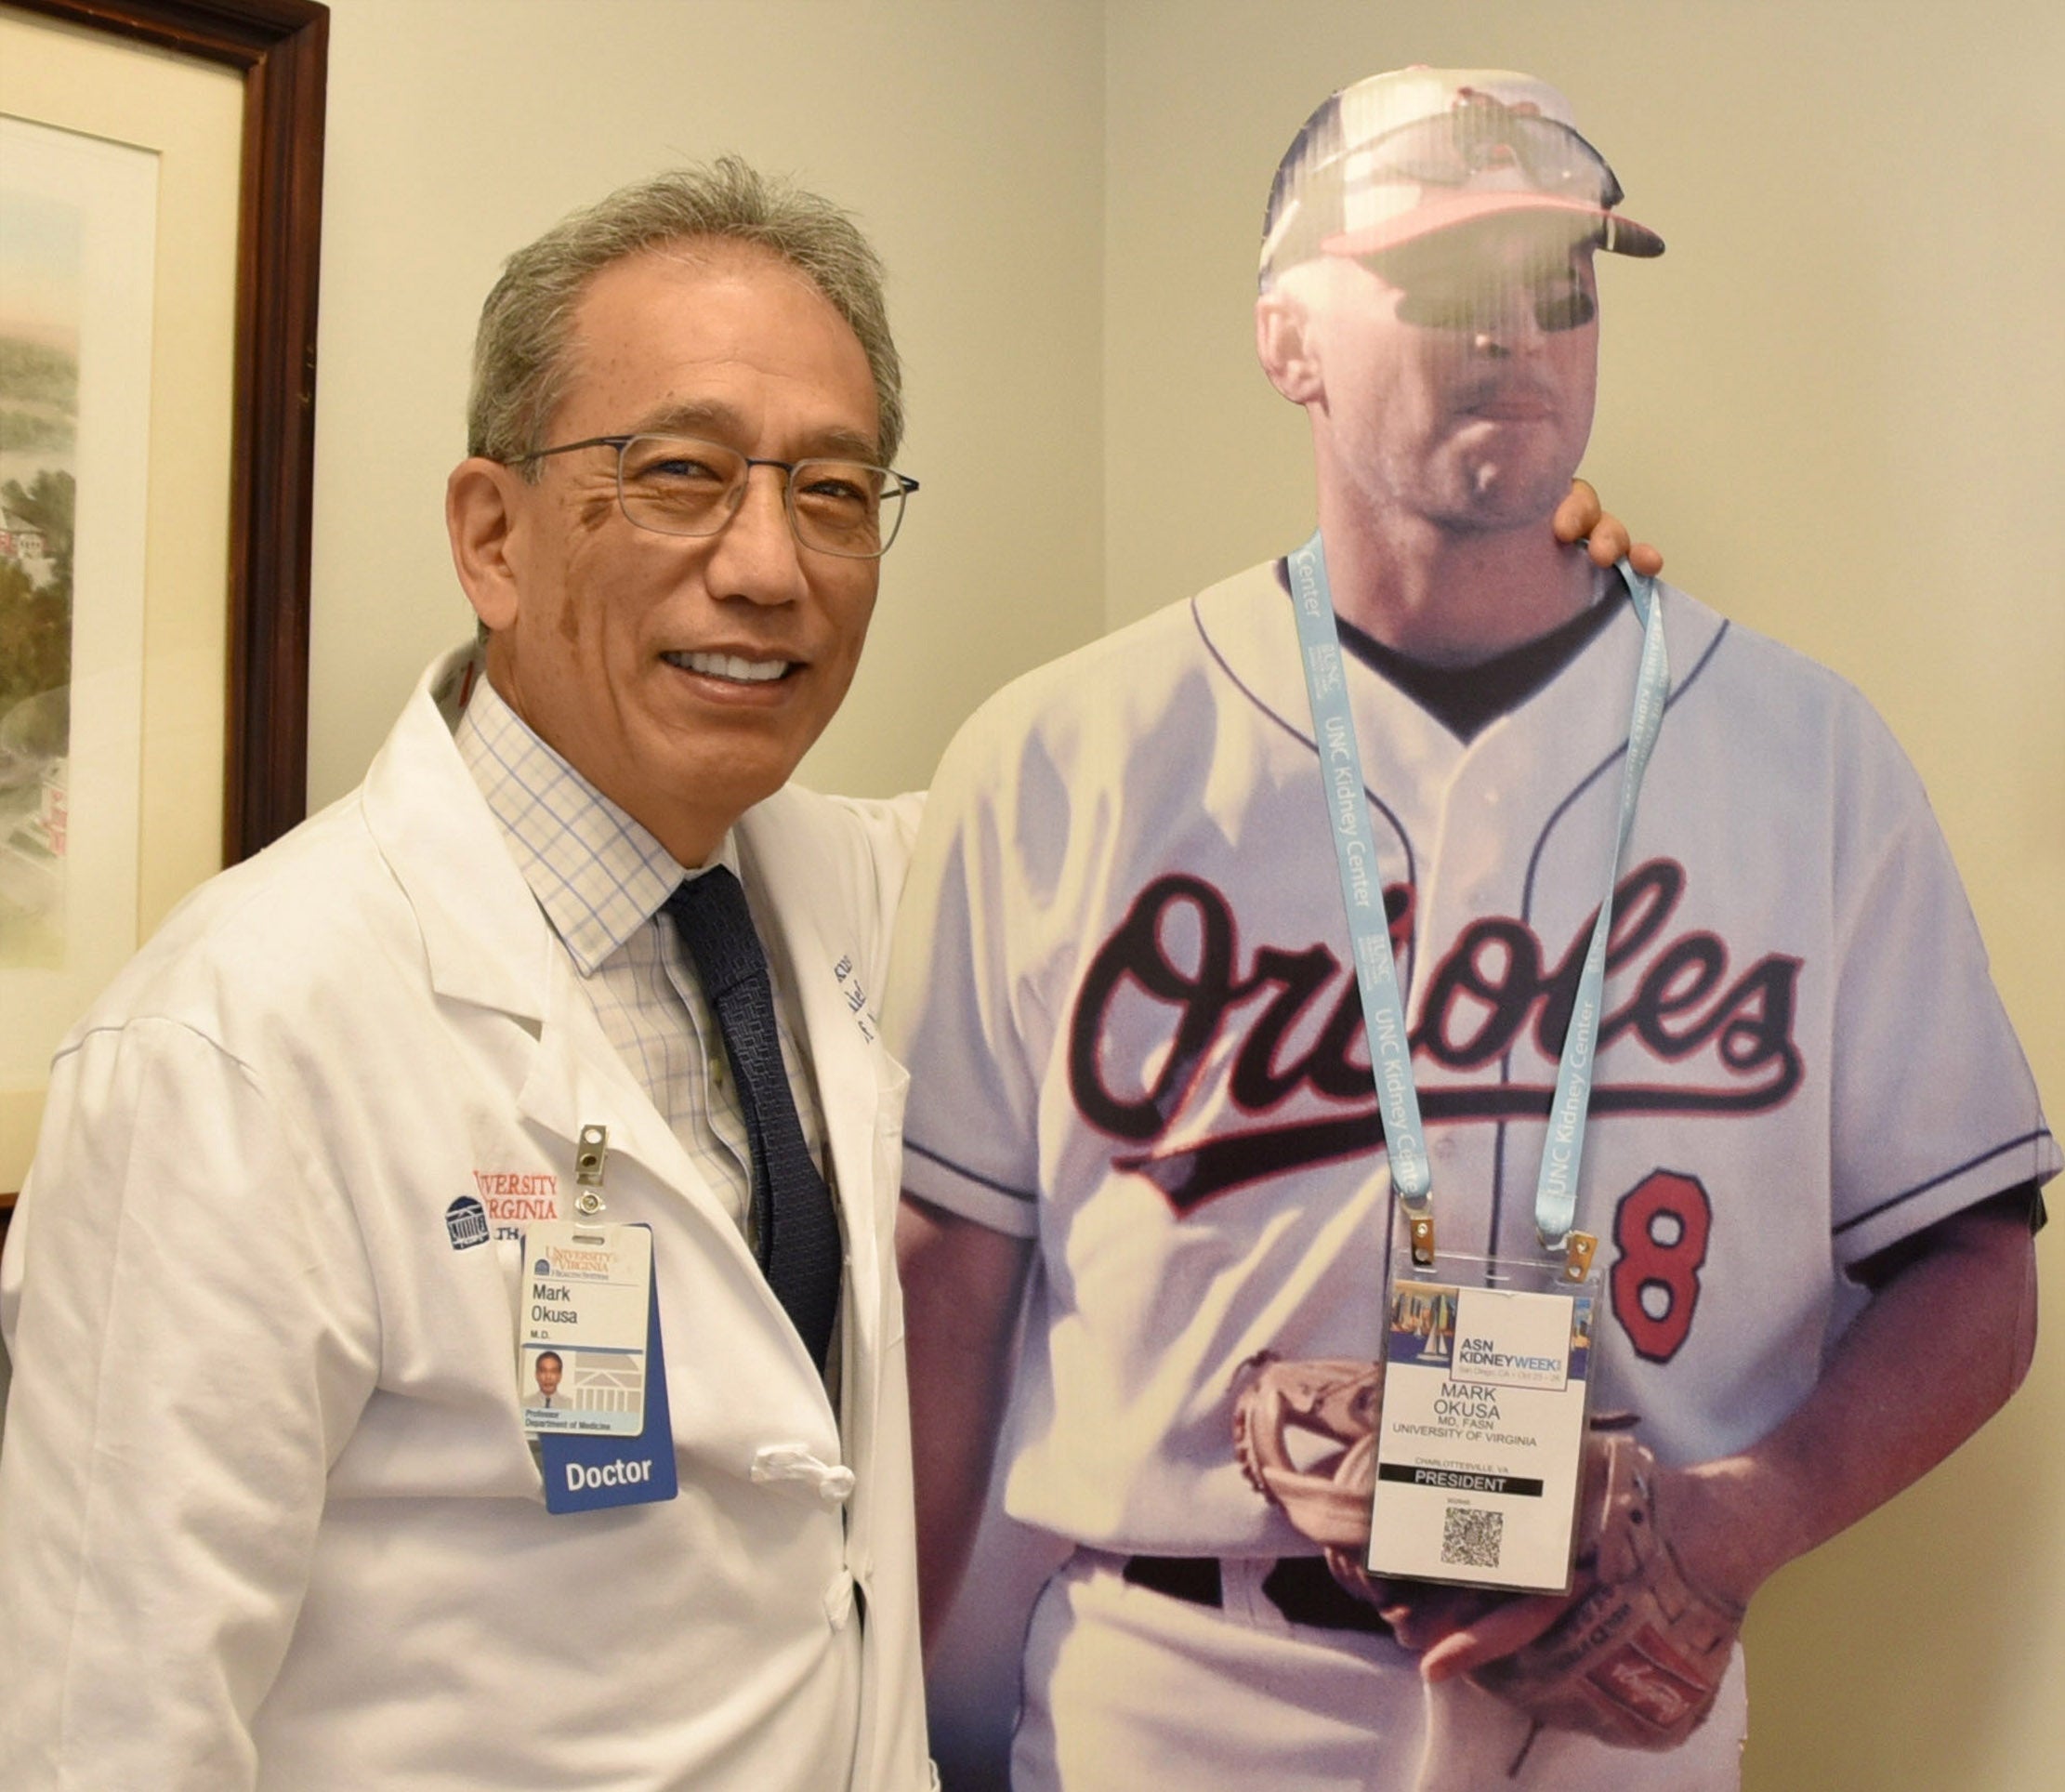 Lab member posing with a baseball player cut out